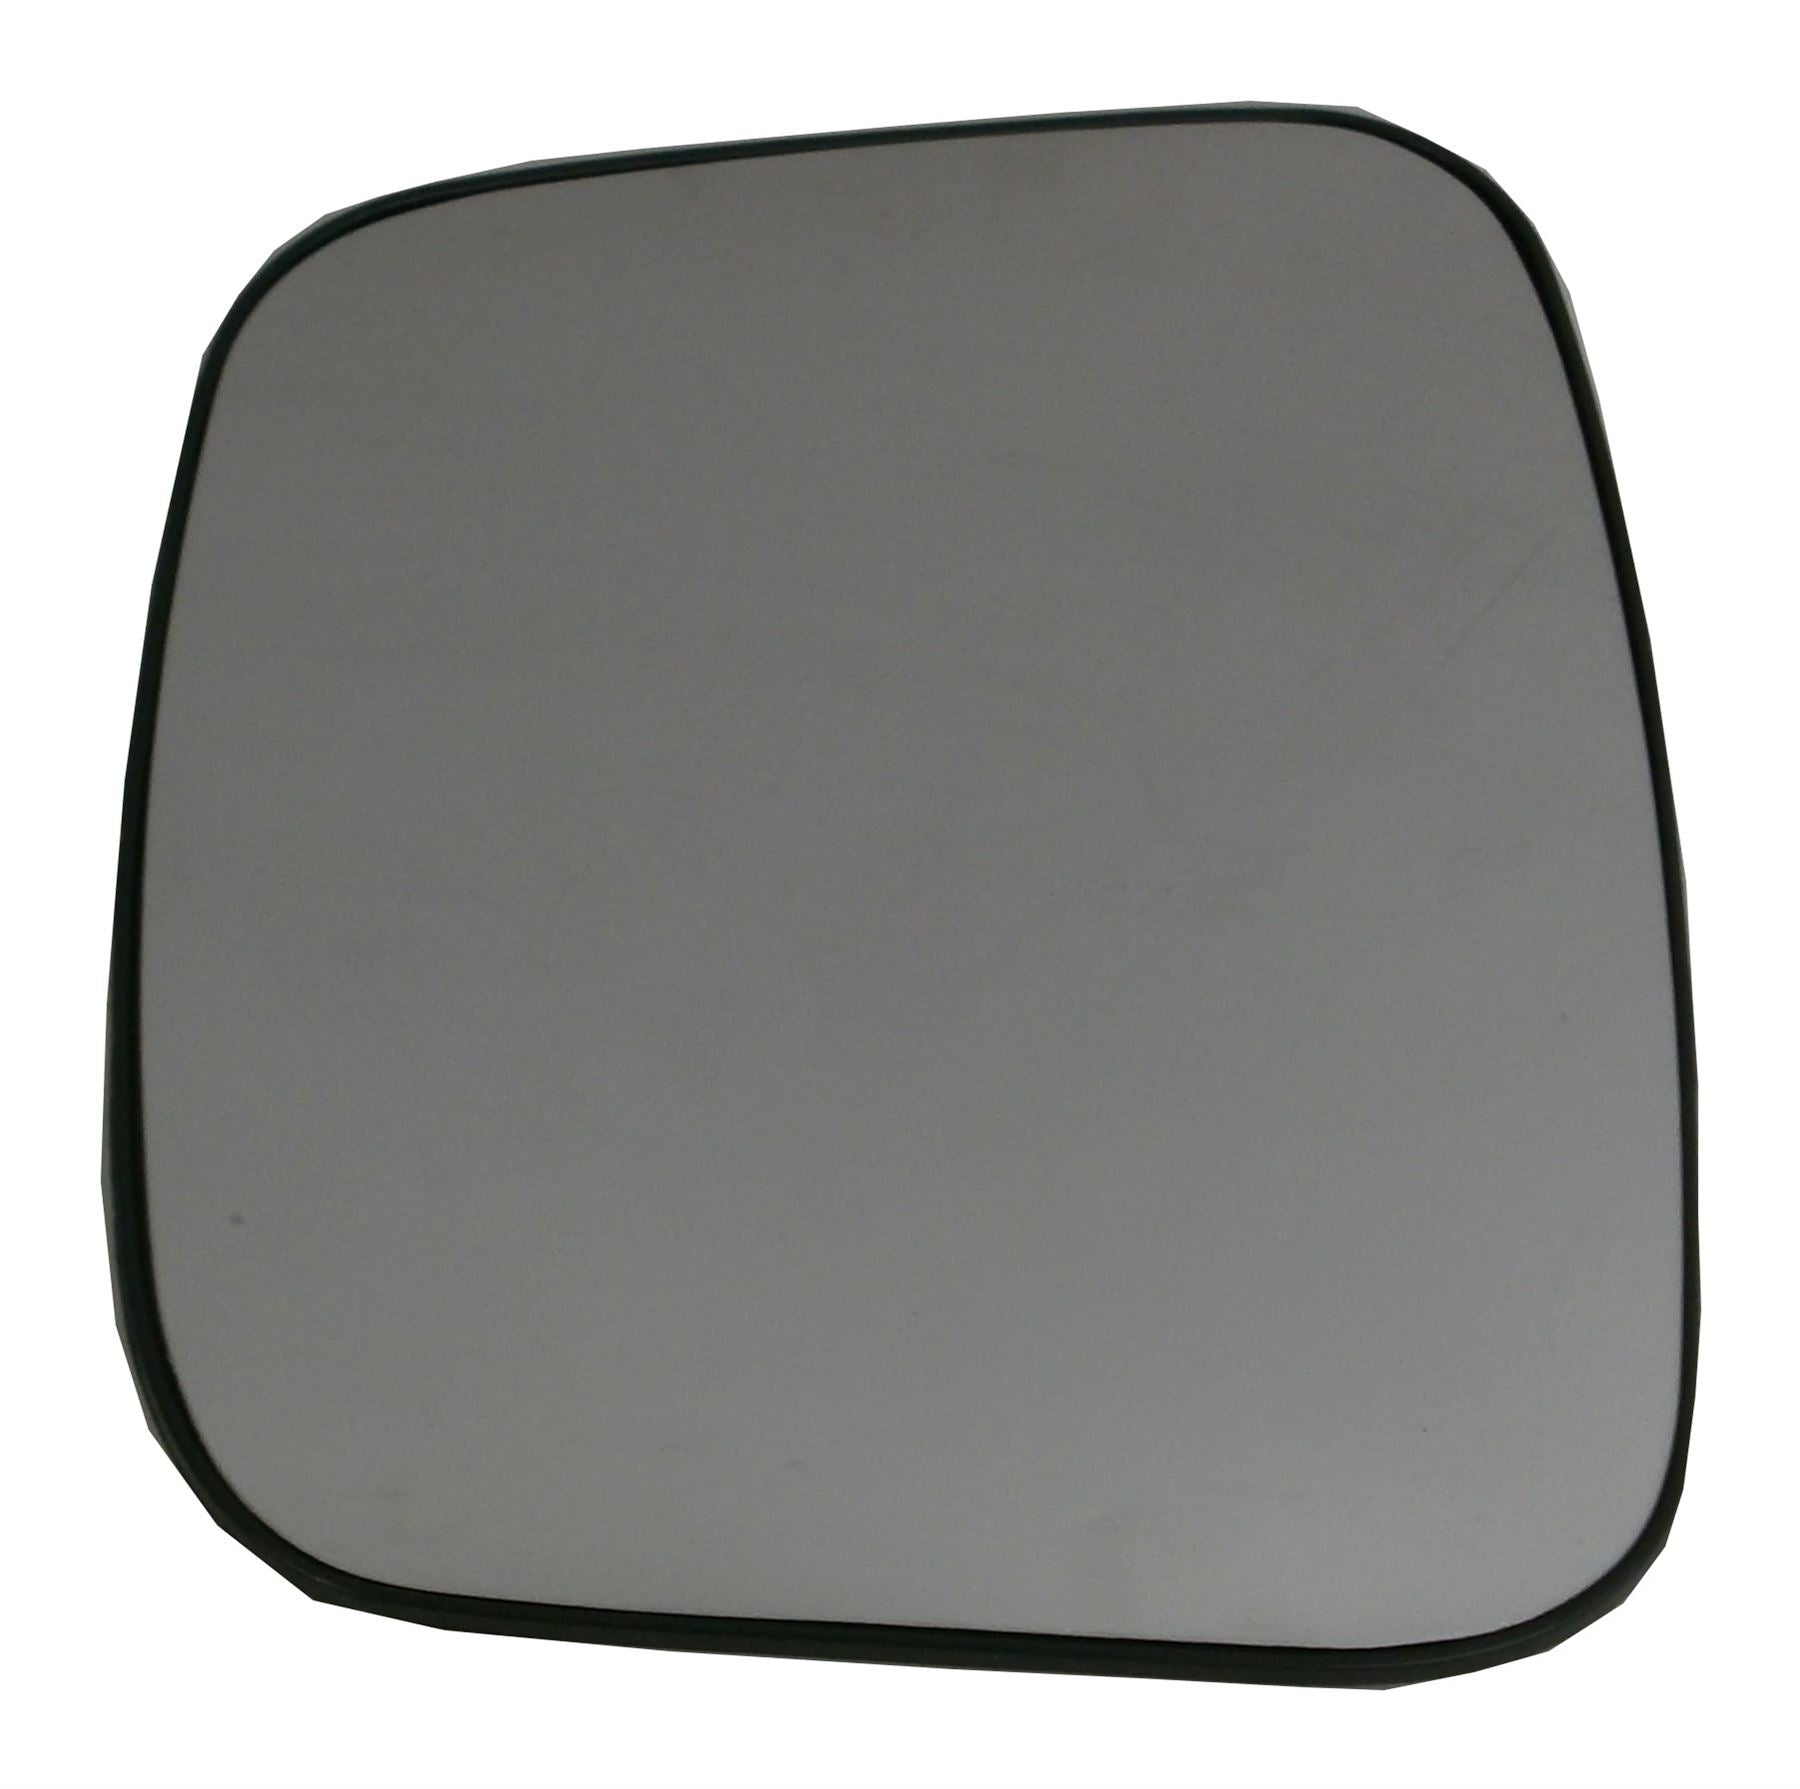 Peugeot Bipper 2008+ Non-Heated Convex Mirror Glass Passengers Side N/S